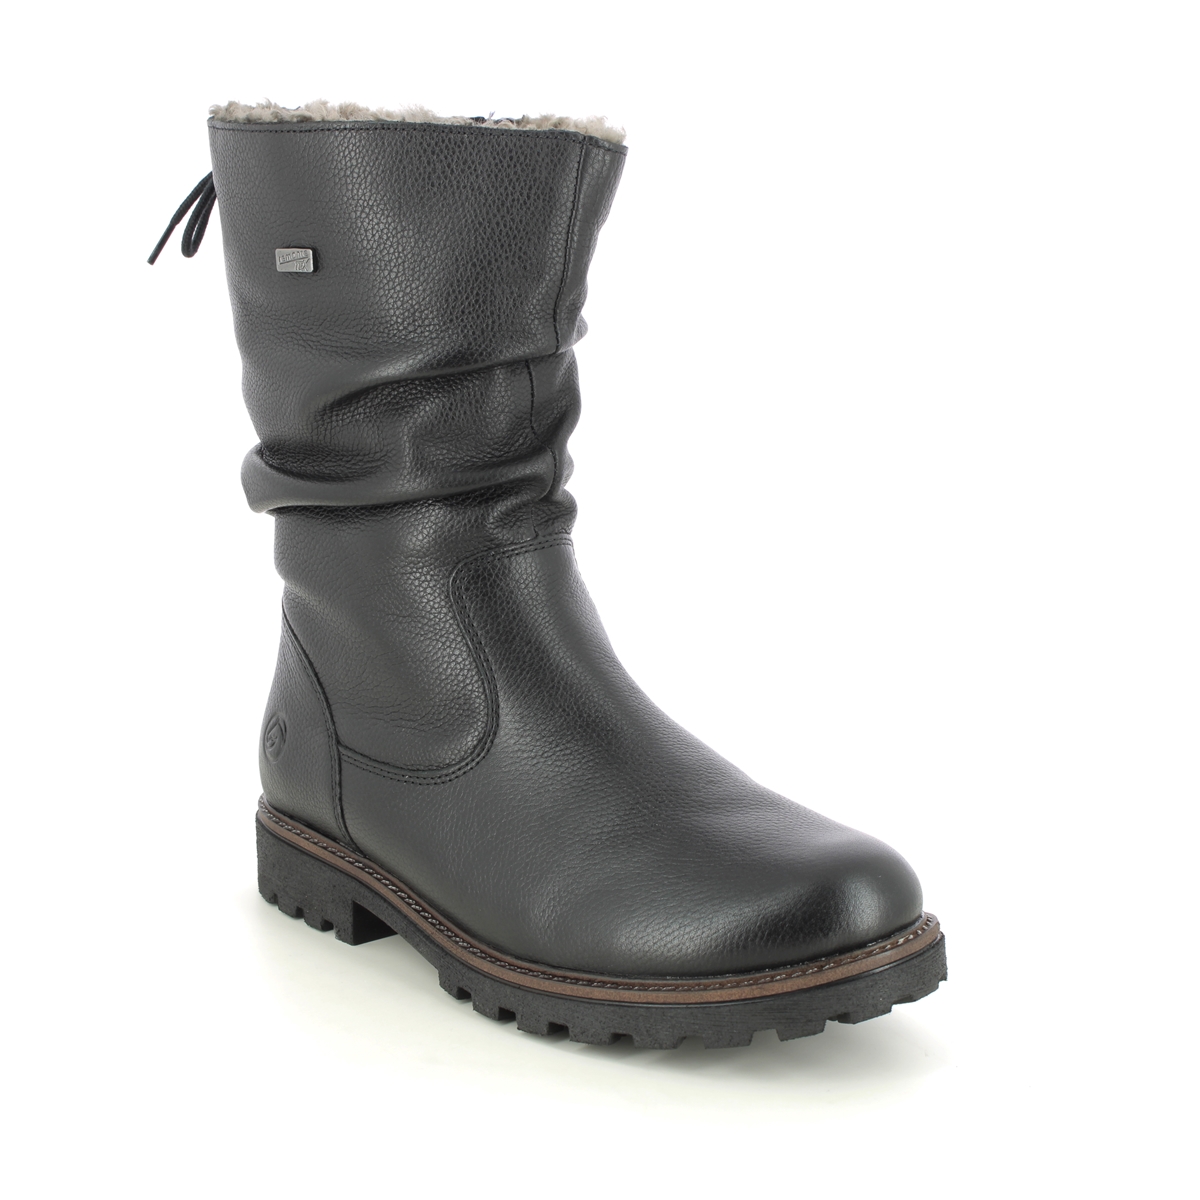 Remonte Brand Tex Sheep Black Leather Womens Mid Calf Boots D8477-01 In Size 42 In Plain Black Leather